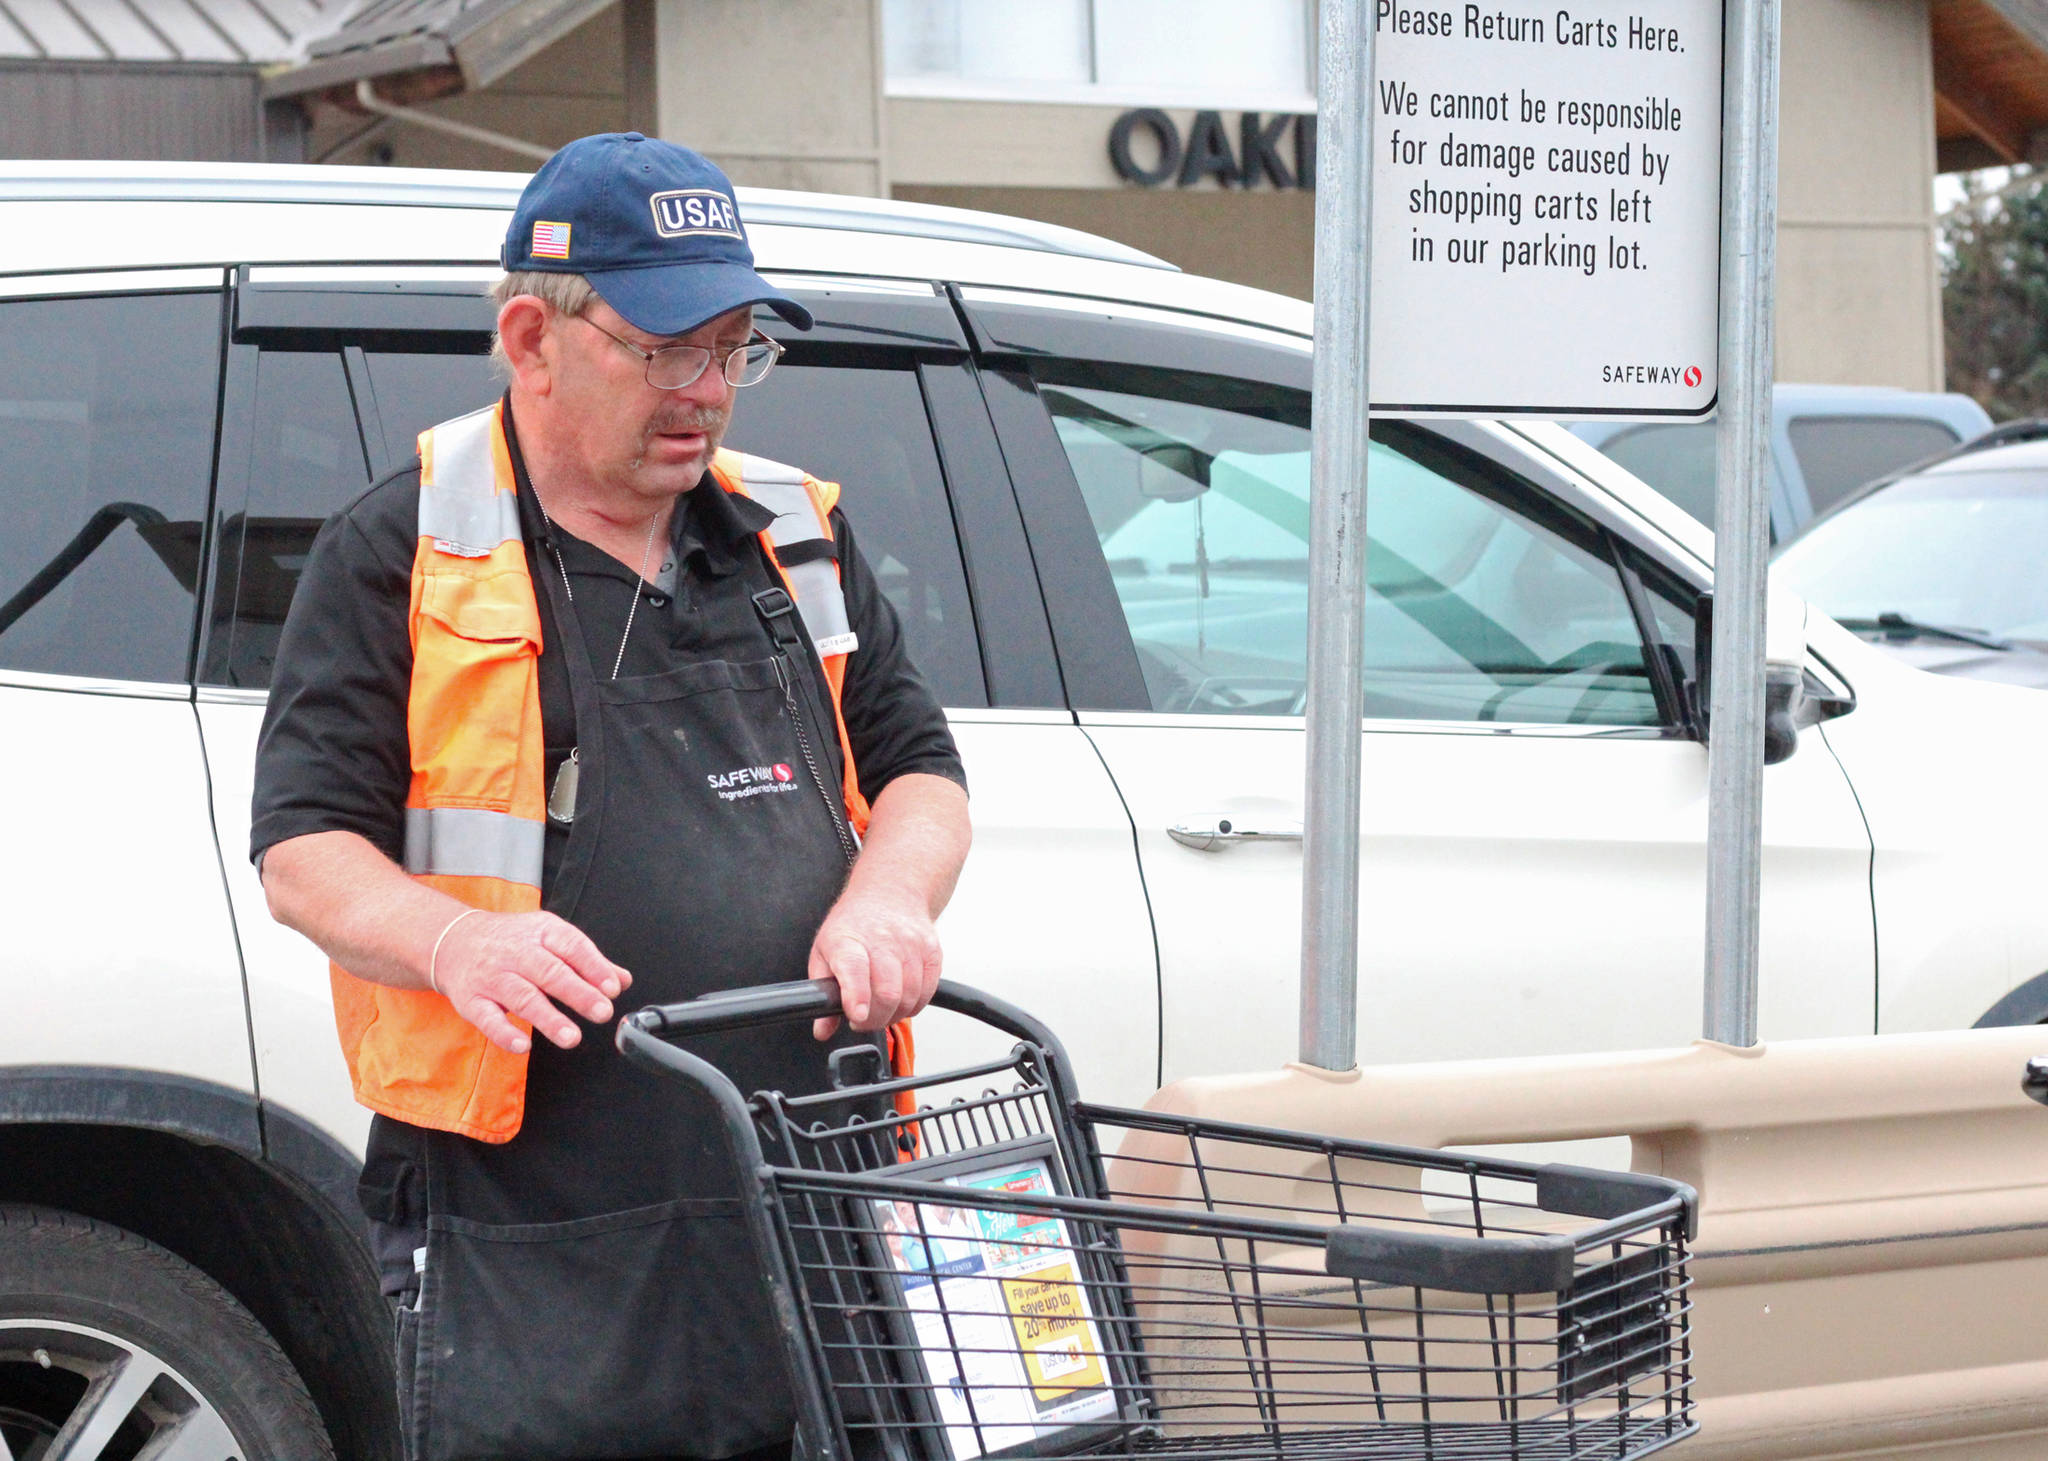 Homer resident Terry Elliott works his last shift at Safeway on his birthday before retiring Tuesday, Sept. 5, 2017 in Homer, Alaska. Elliott, who was worked there since approximately 1989, turned 62 on Tuesday. He has also volunteered with the Boy Scouts of America for decades. (Photo by Megan Pacer/Homer News)